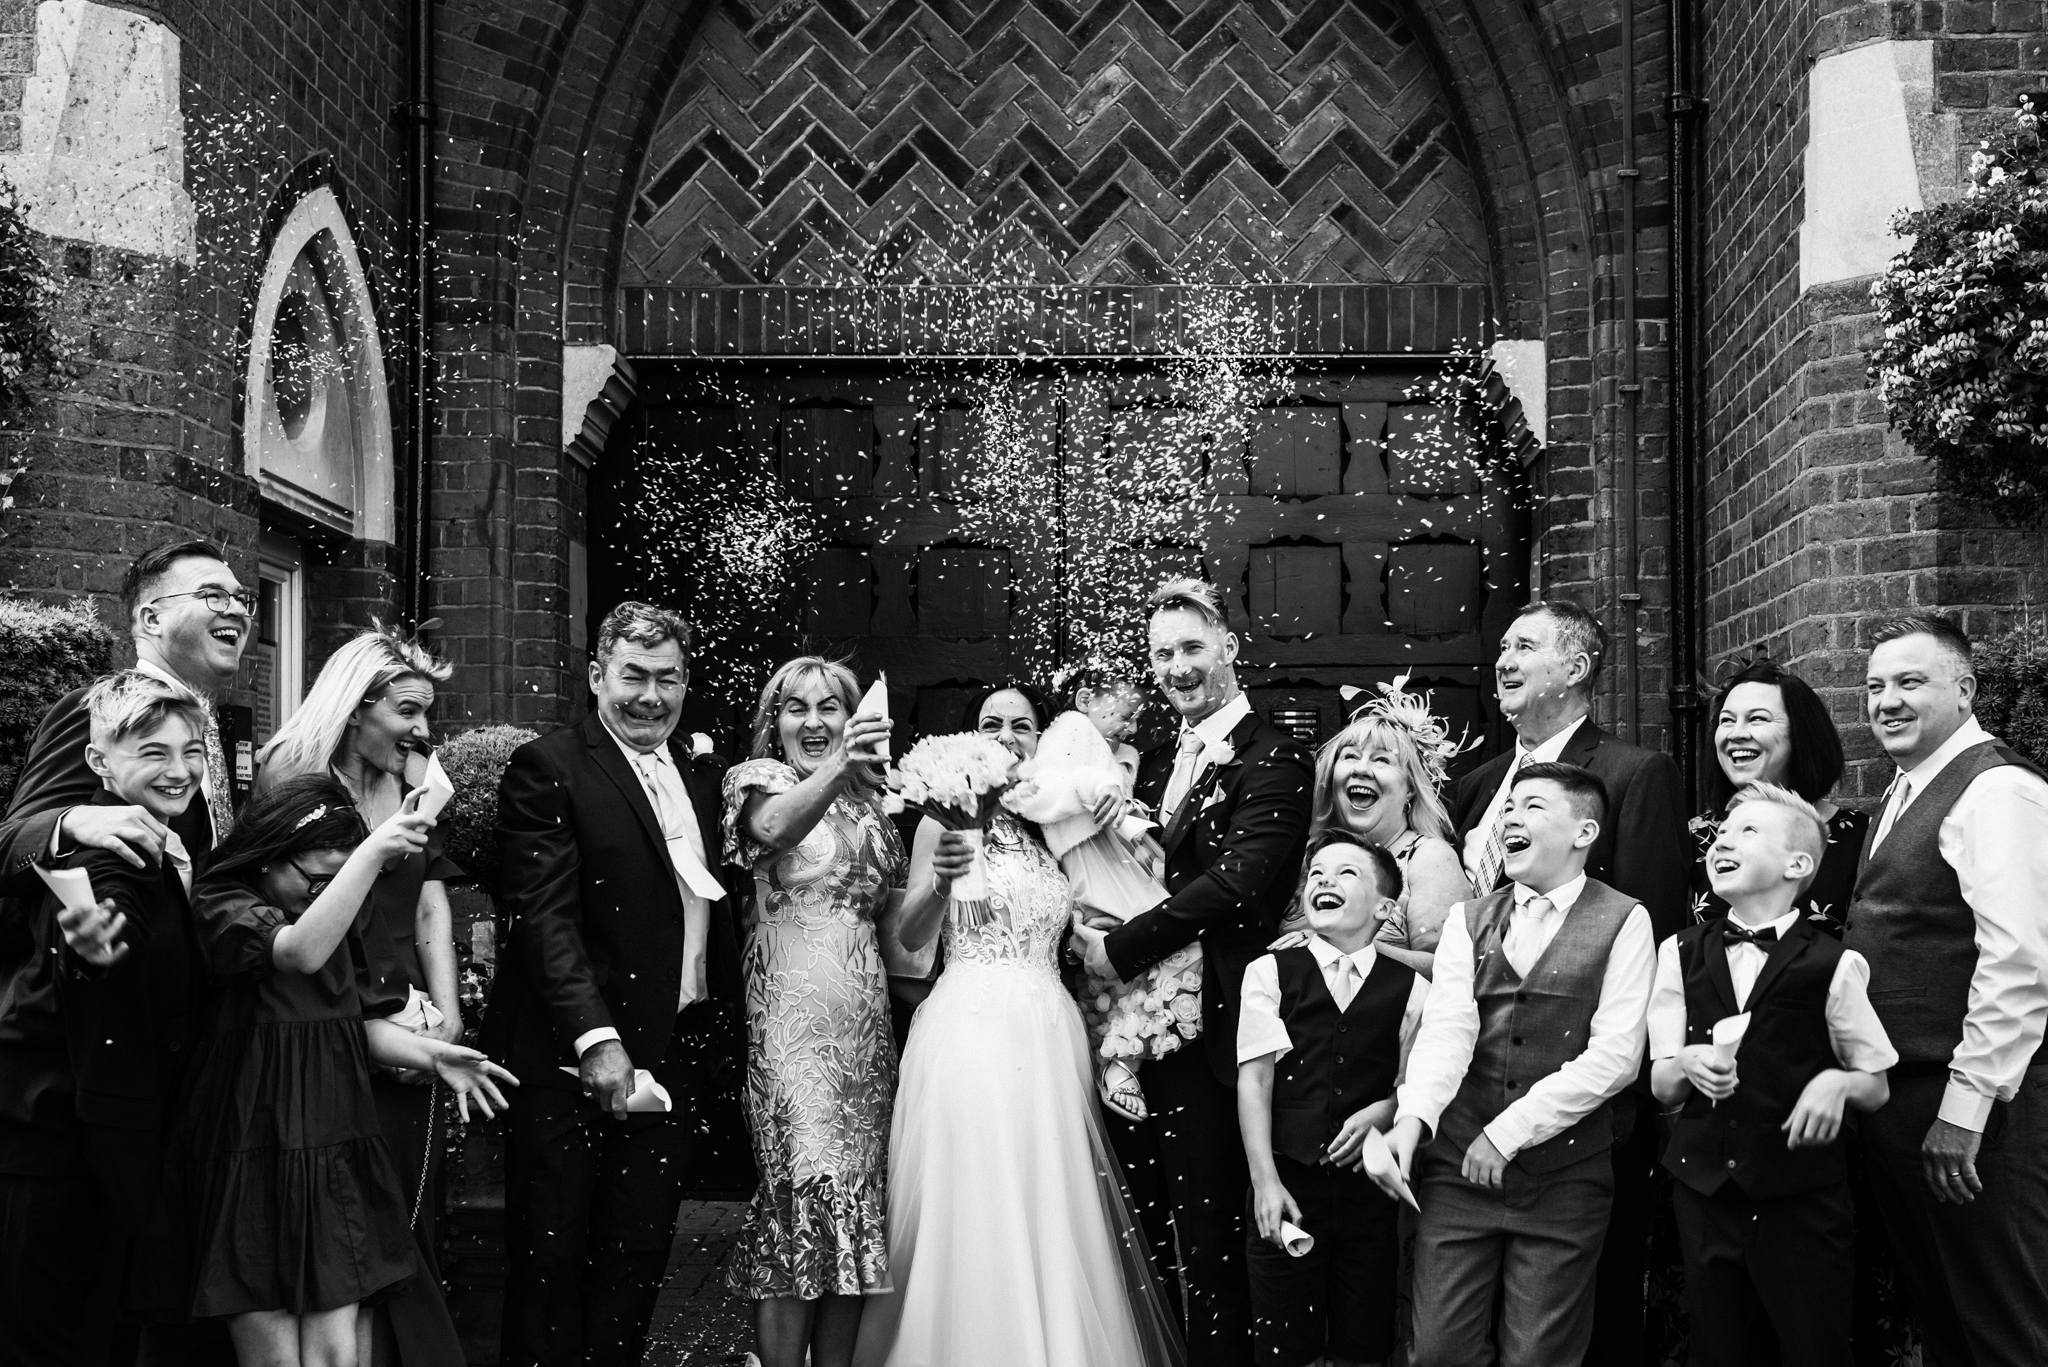 Wedding party celebrate by throwing lots of confetti after Hertfordshire wedding service